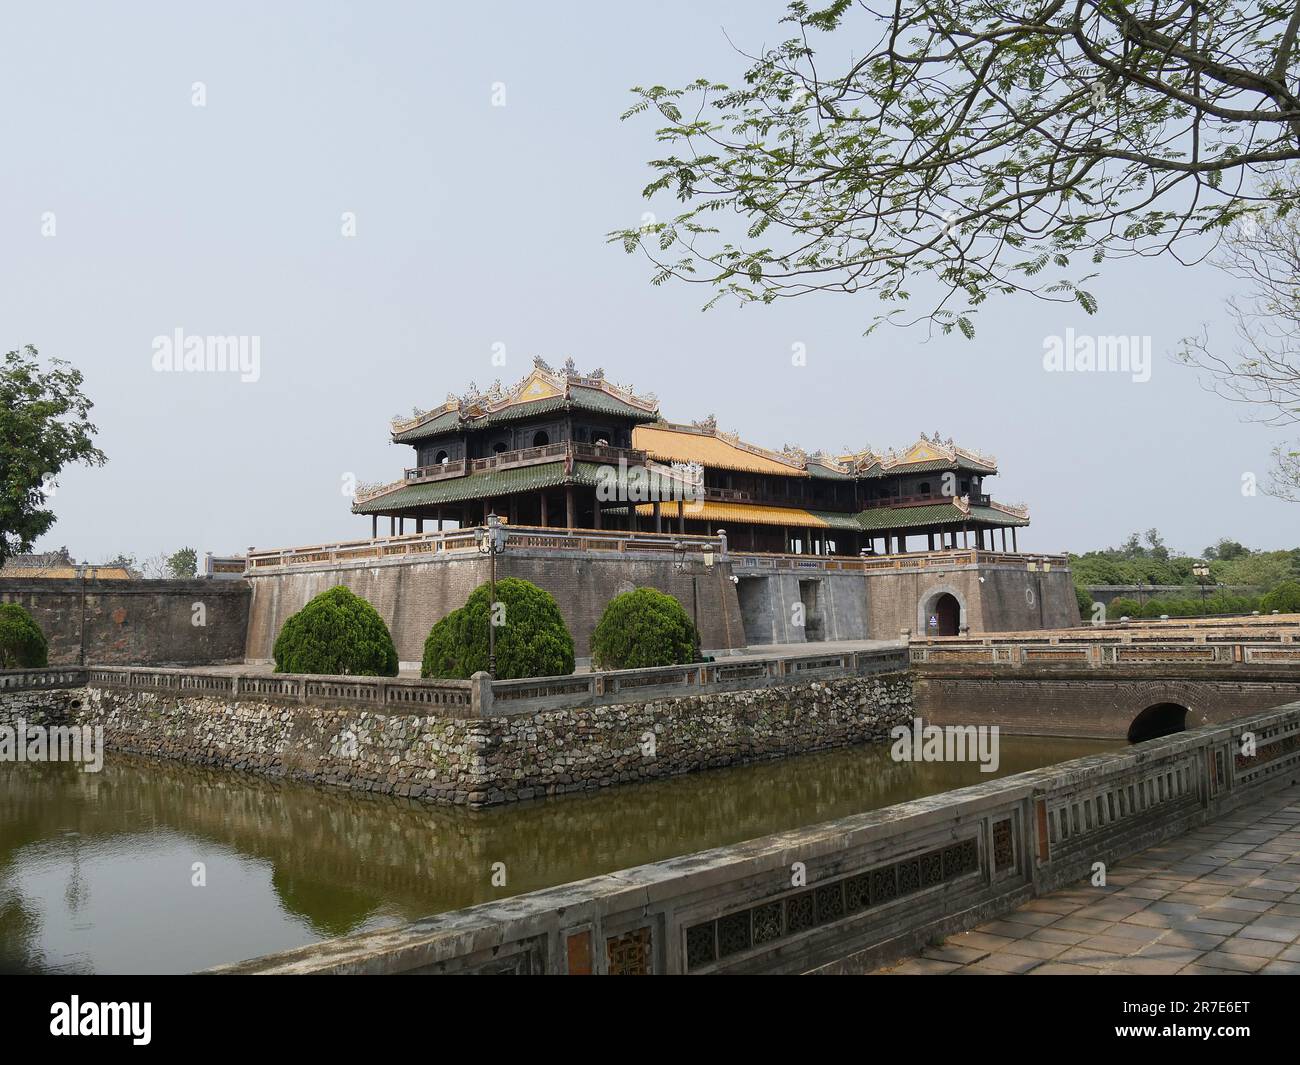 Vietnam, Thua Thien Hue Province, Hue City, listed at World Heritage site by Unesco, Forbidden City or Purple City in the Heart of Imperial City Stock Photo